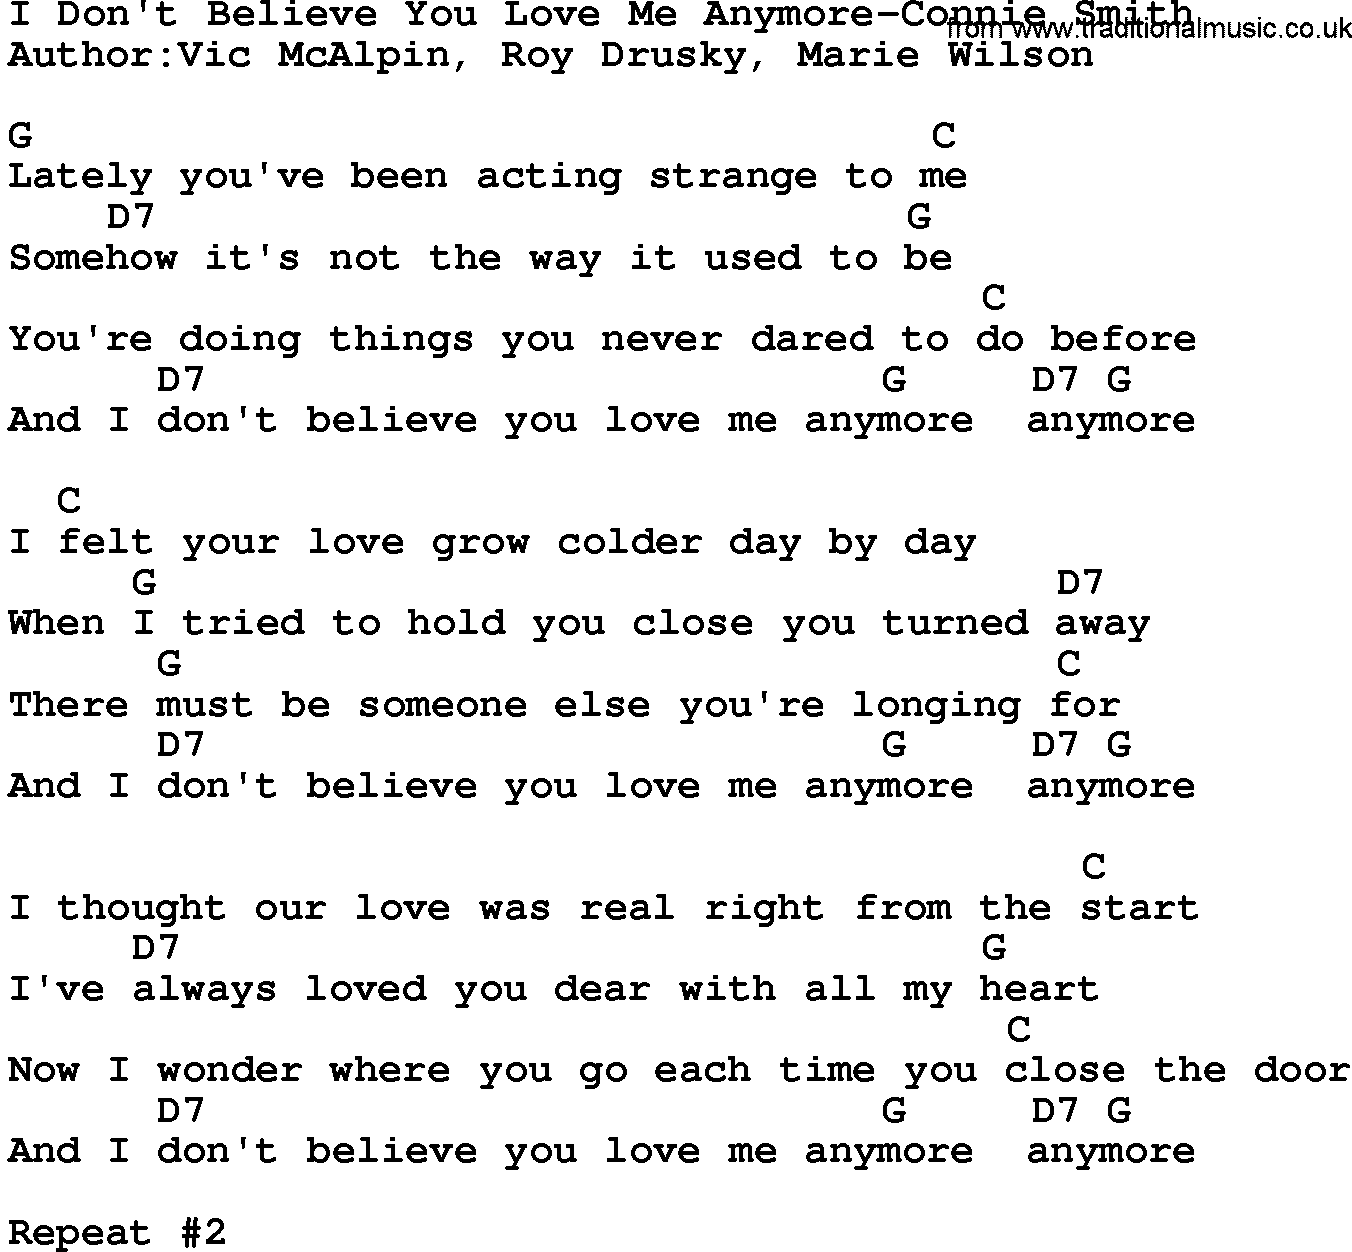 Country music song: I Don't Believe You Love Me Anymore-Connie Smith lyrics and chords